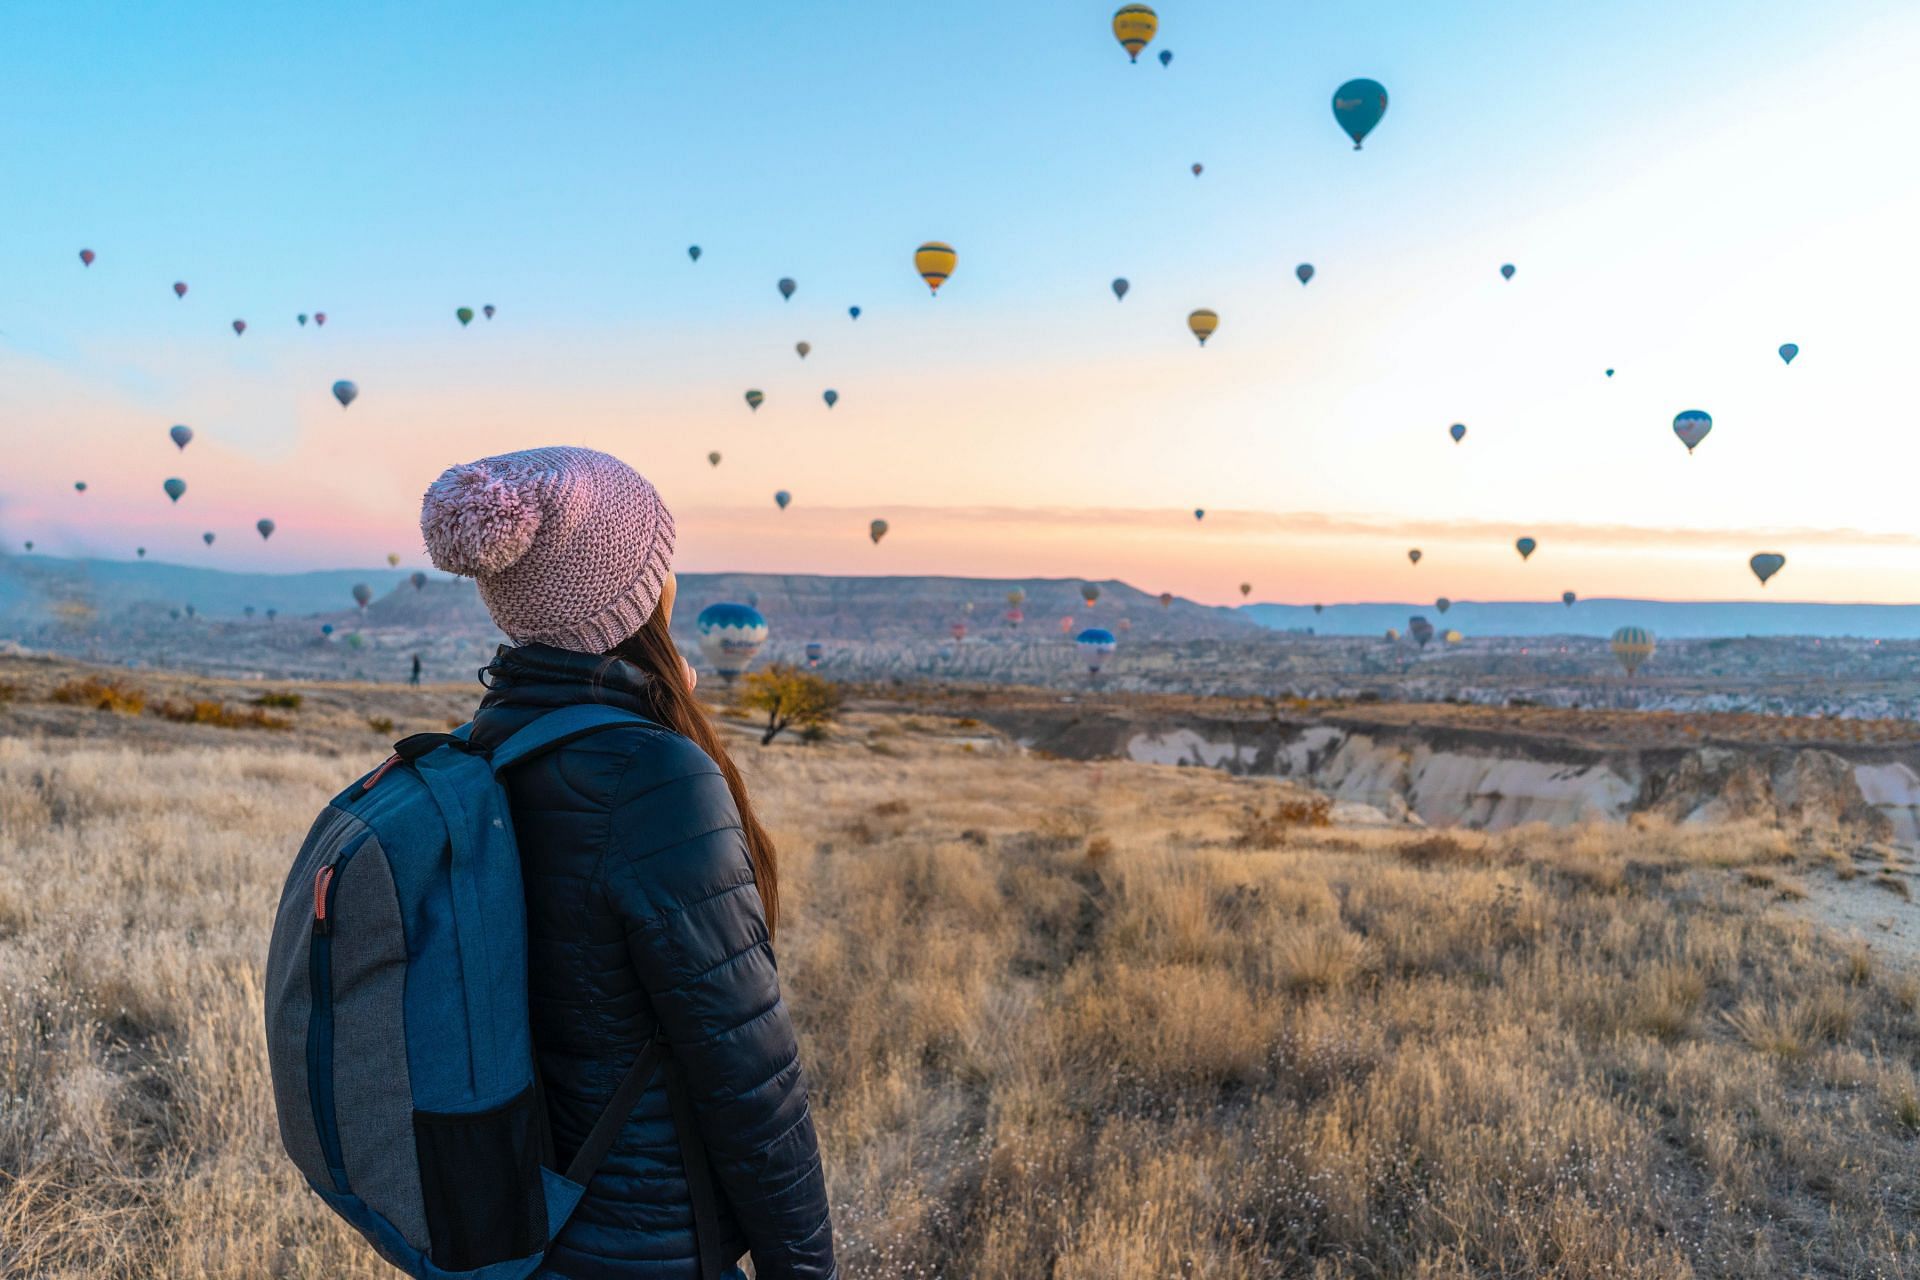 Travelling can help you explore your inner self and aid emotional growth. (Image via Pexels/ Oleksandr P)